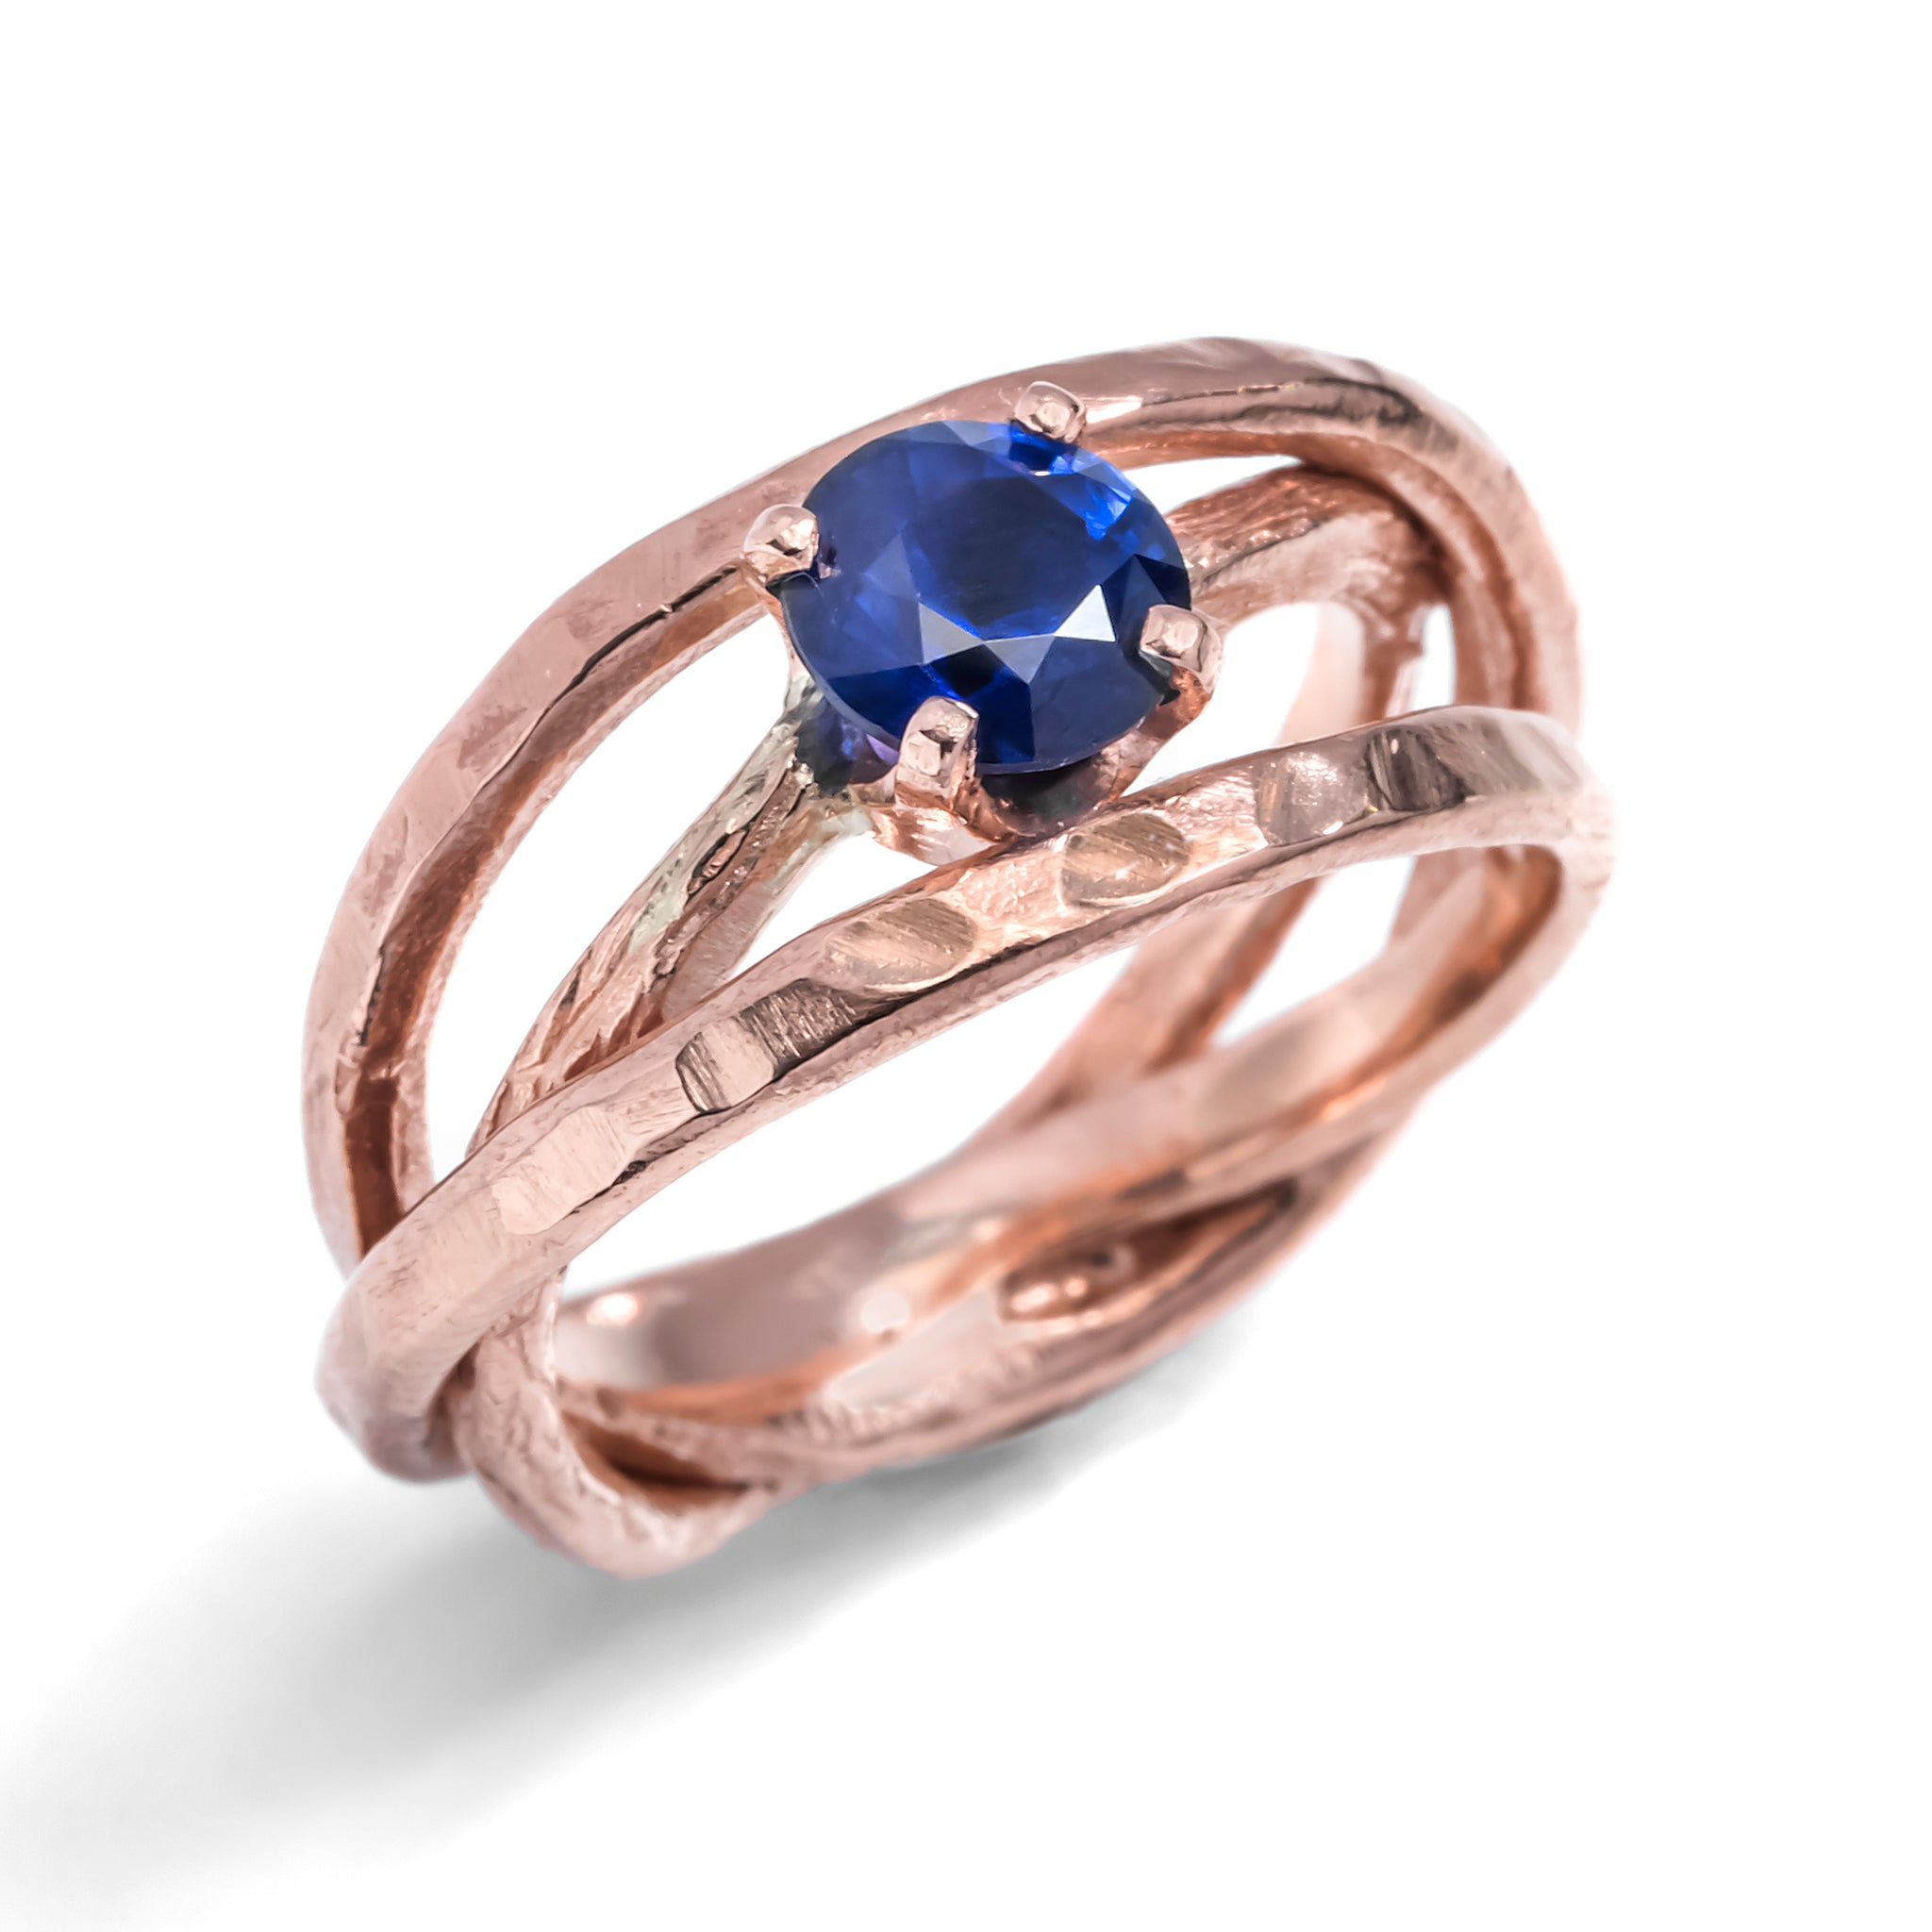 Interconnected Solitaire Ring with Sapphire